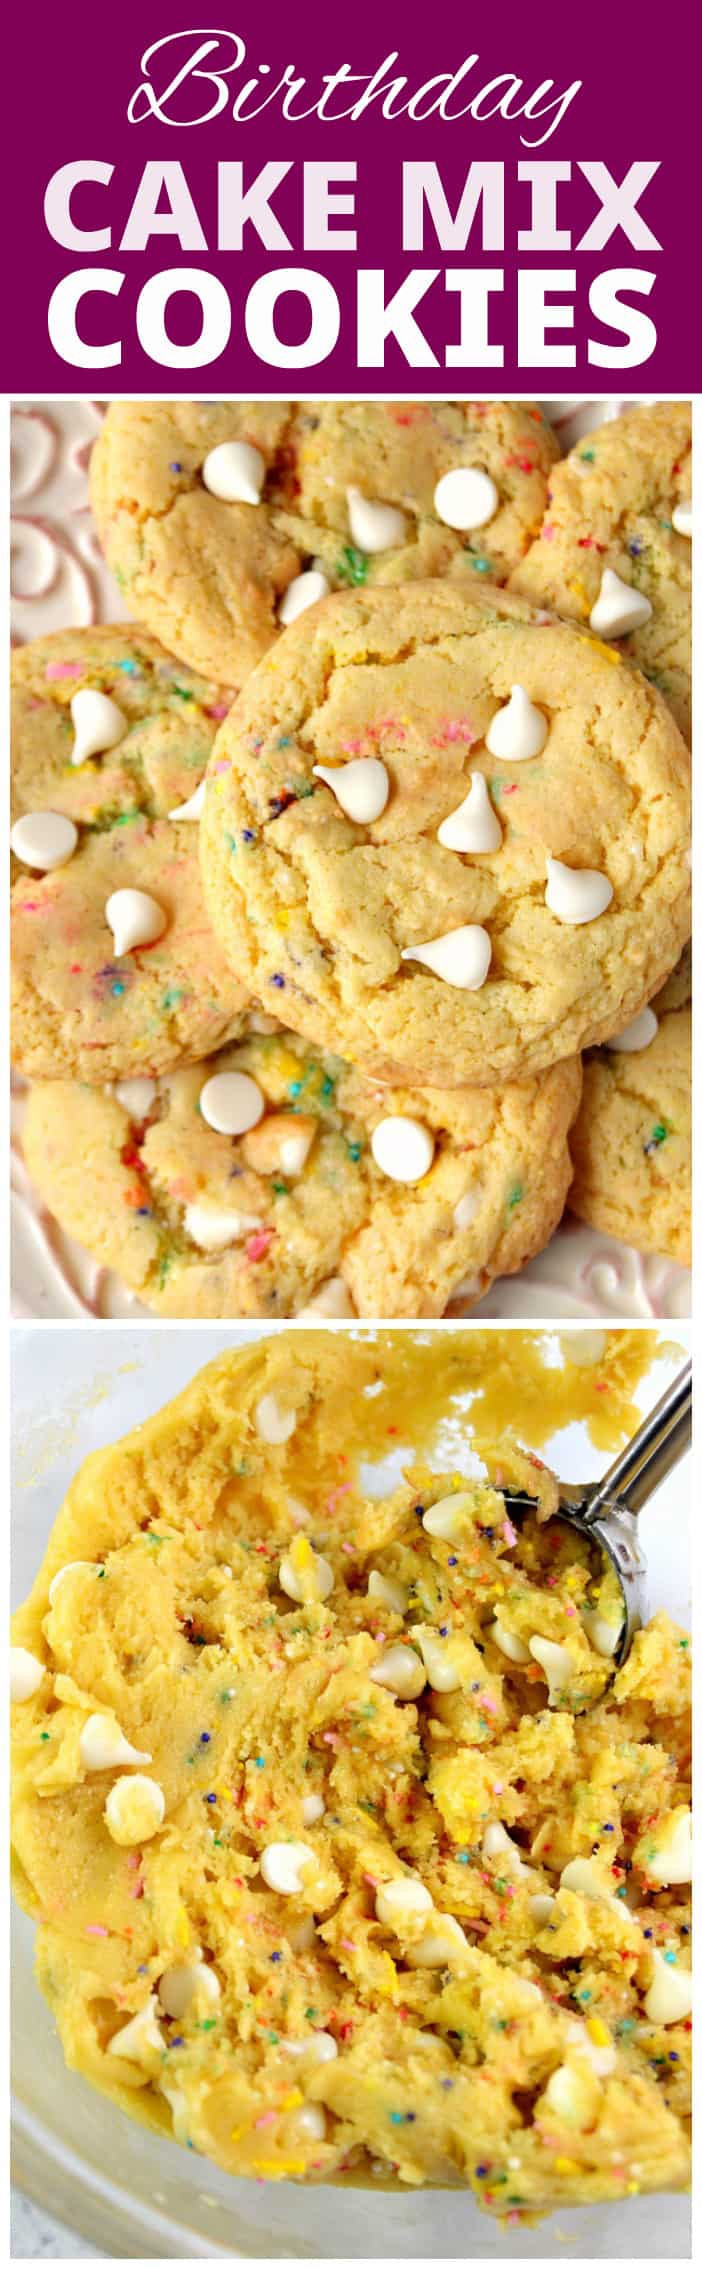 Recipes For Cake Mix Cookies
 Birthday Cake Mix Cookies Recipe Crunchy Creamy Sweet